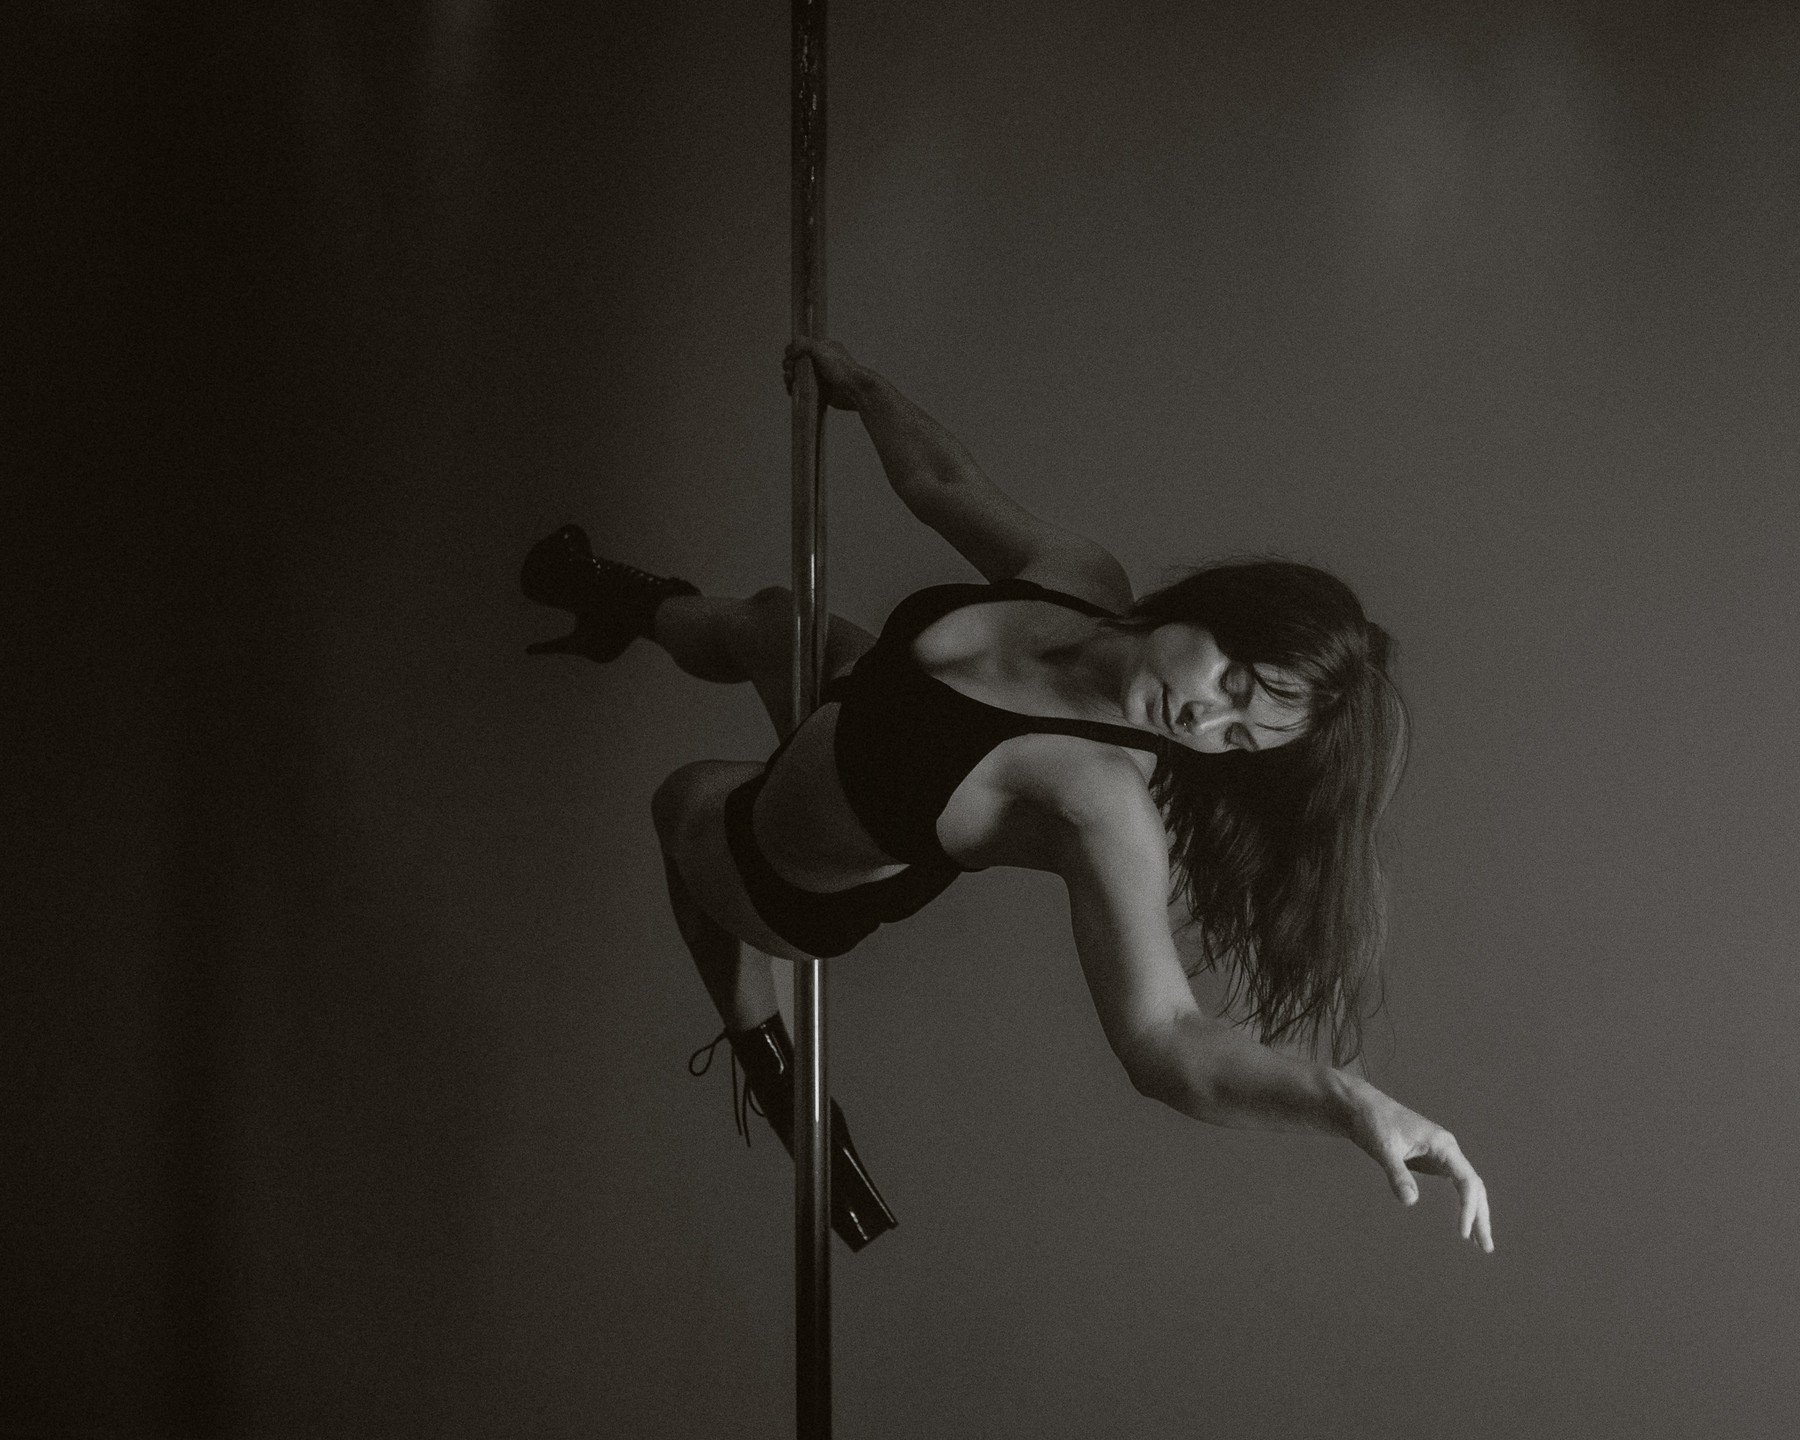 I heard one of our wonderful instructors describe watching an aerialist for the first time as 'so dreamy' and I gotta say... I wholeheartedly agree!

Full sessions are up on my website right now. And be sure to keep your eyes peeled for silks, pole, 